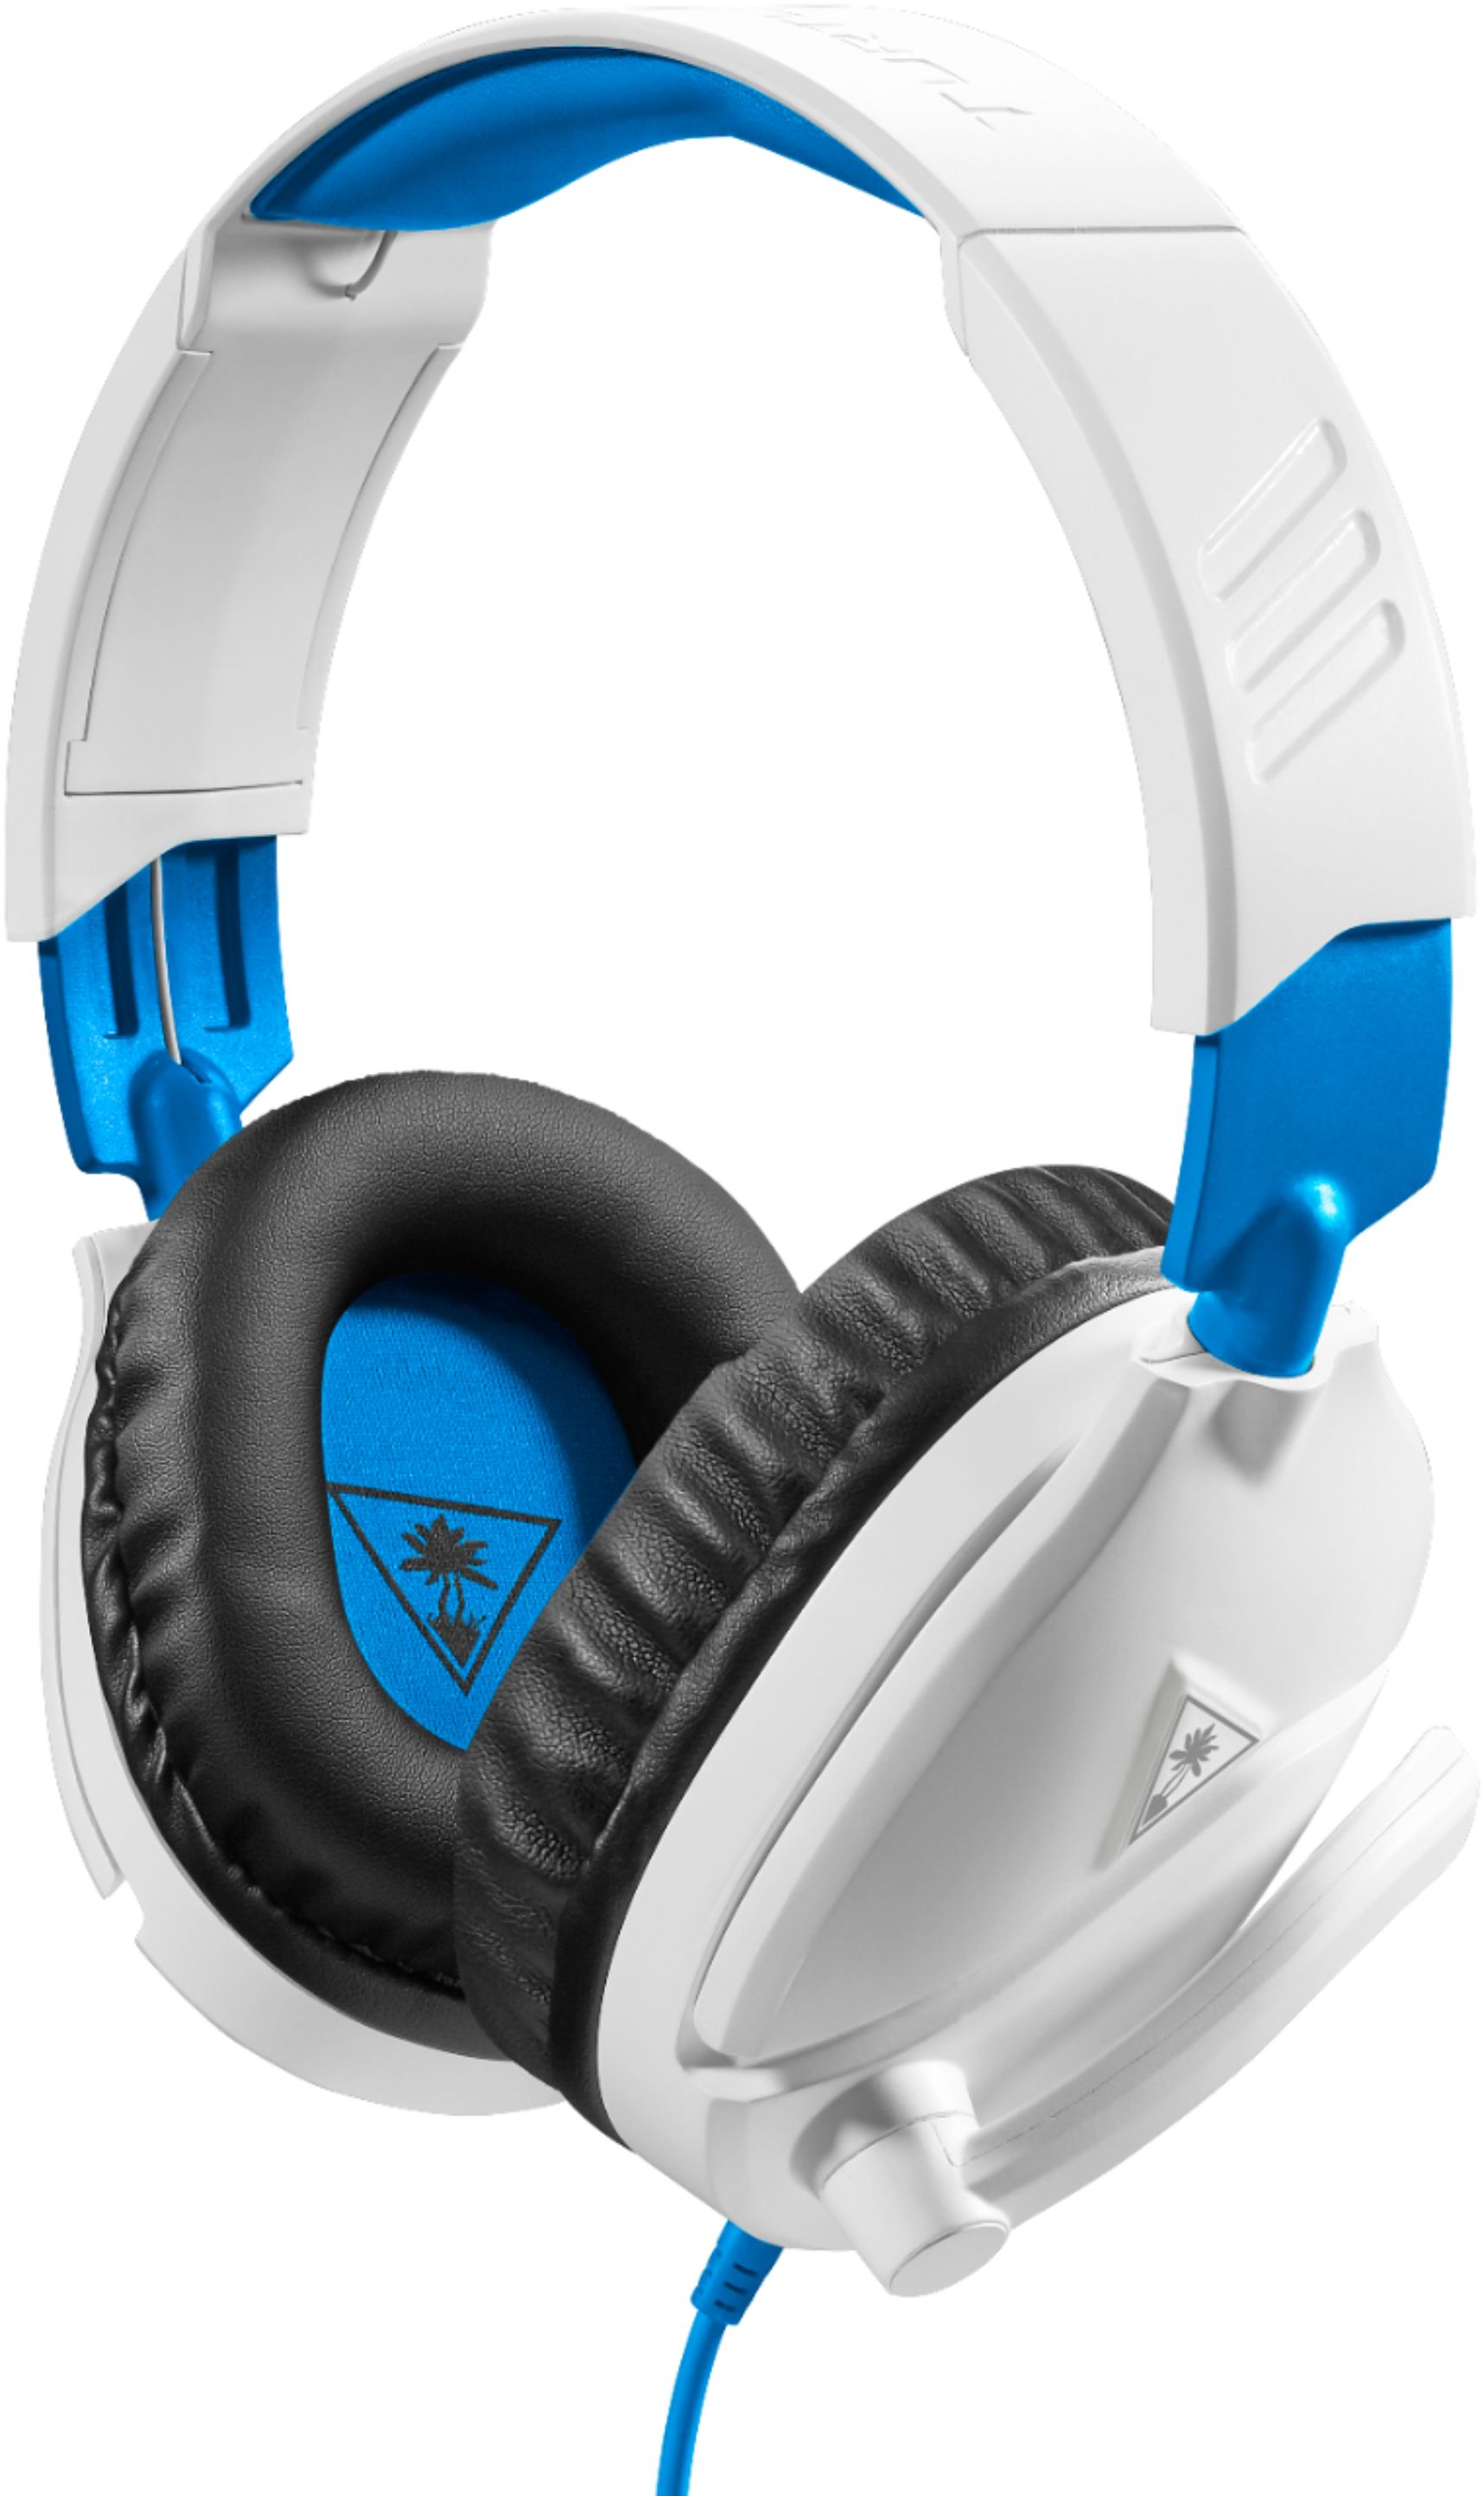 turtle beach headset blue and black